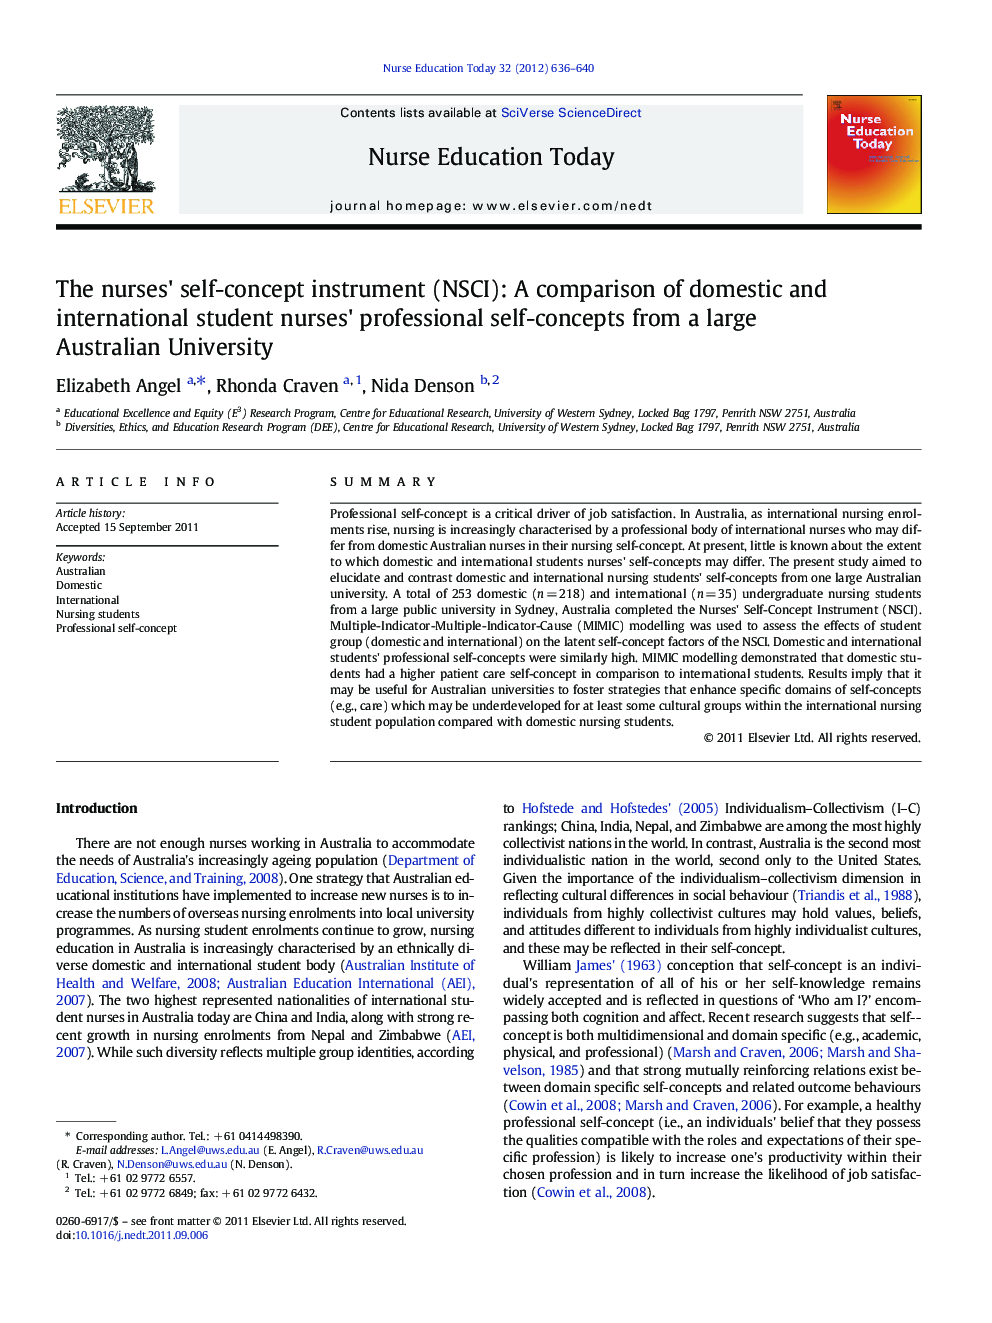 The nurses' self-concept instrument (NSCI): A comparison of domestic and international student nurses' professional self-concepts from a large Australian University